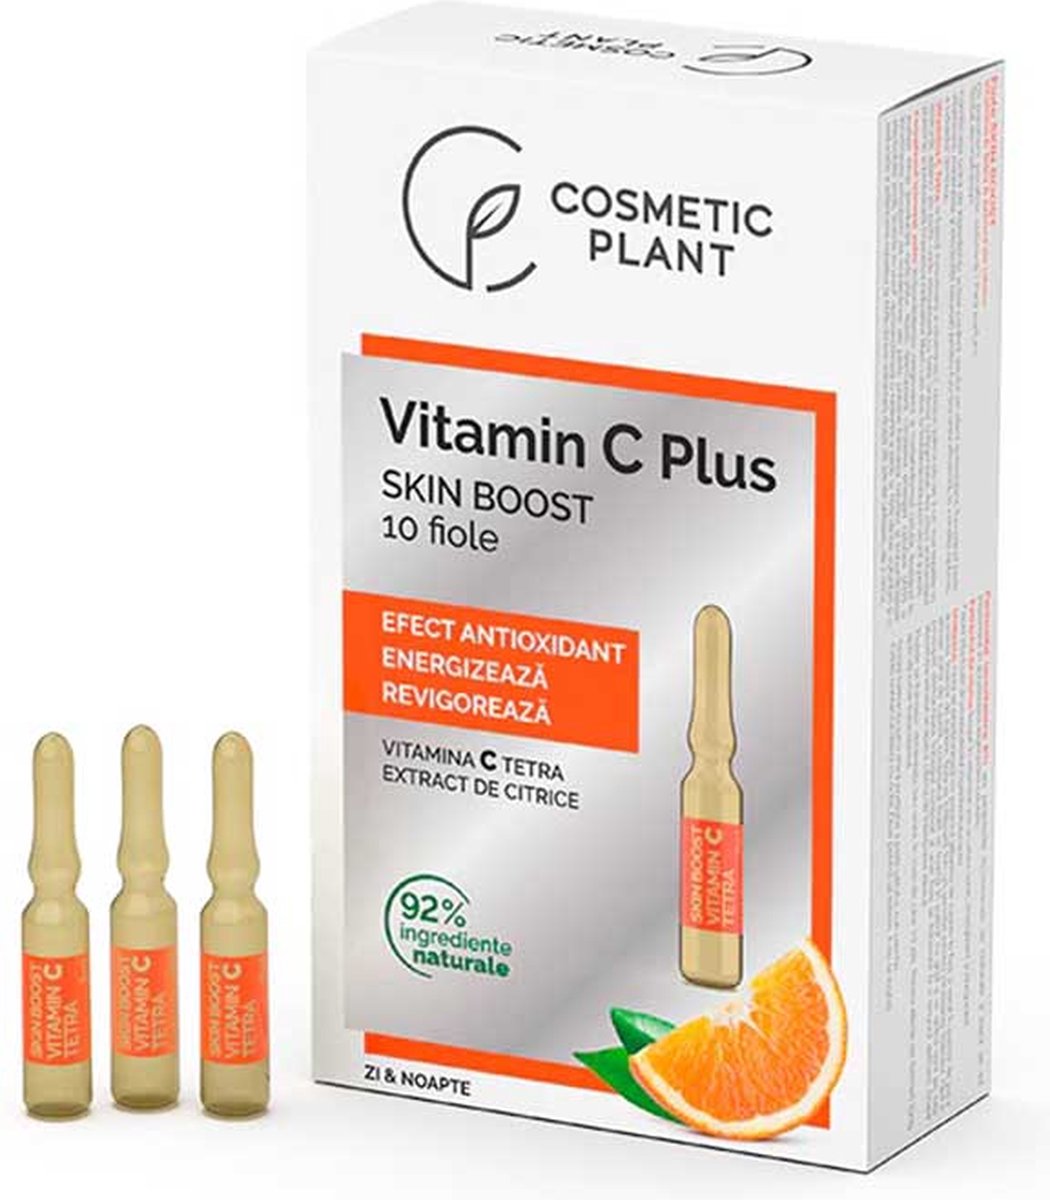 Cosmetic Plant Skin Boost Ampoules with Vitamin C Tetra, Coenzyme Q10 and Vitamin E, 92% natural ingredients 10 x 2ml